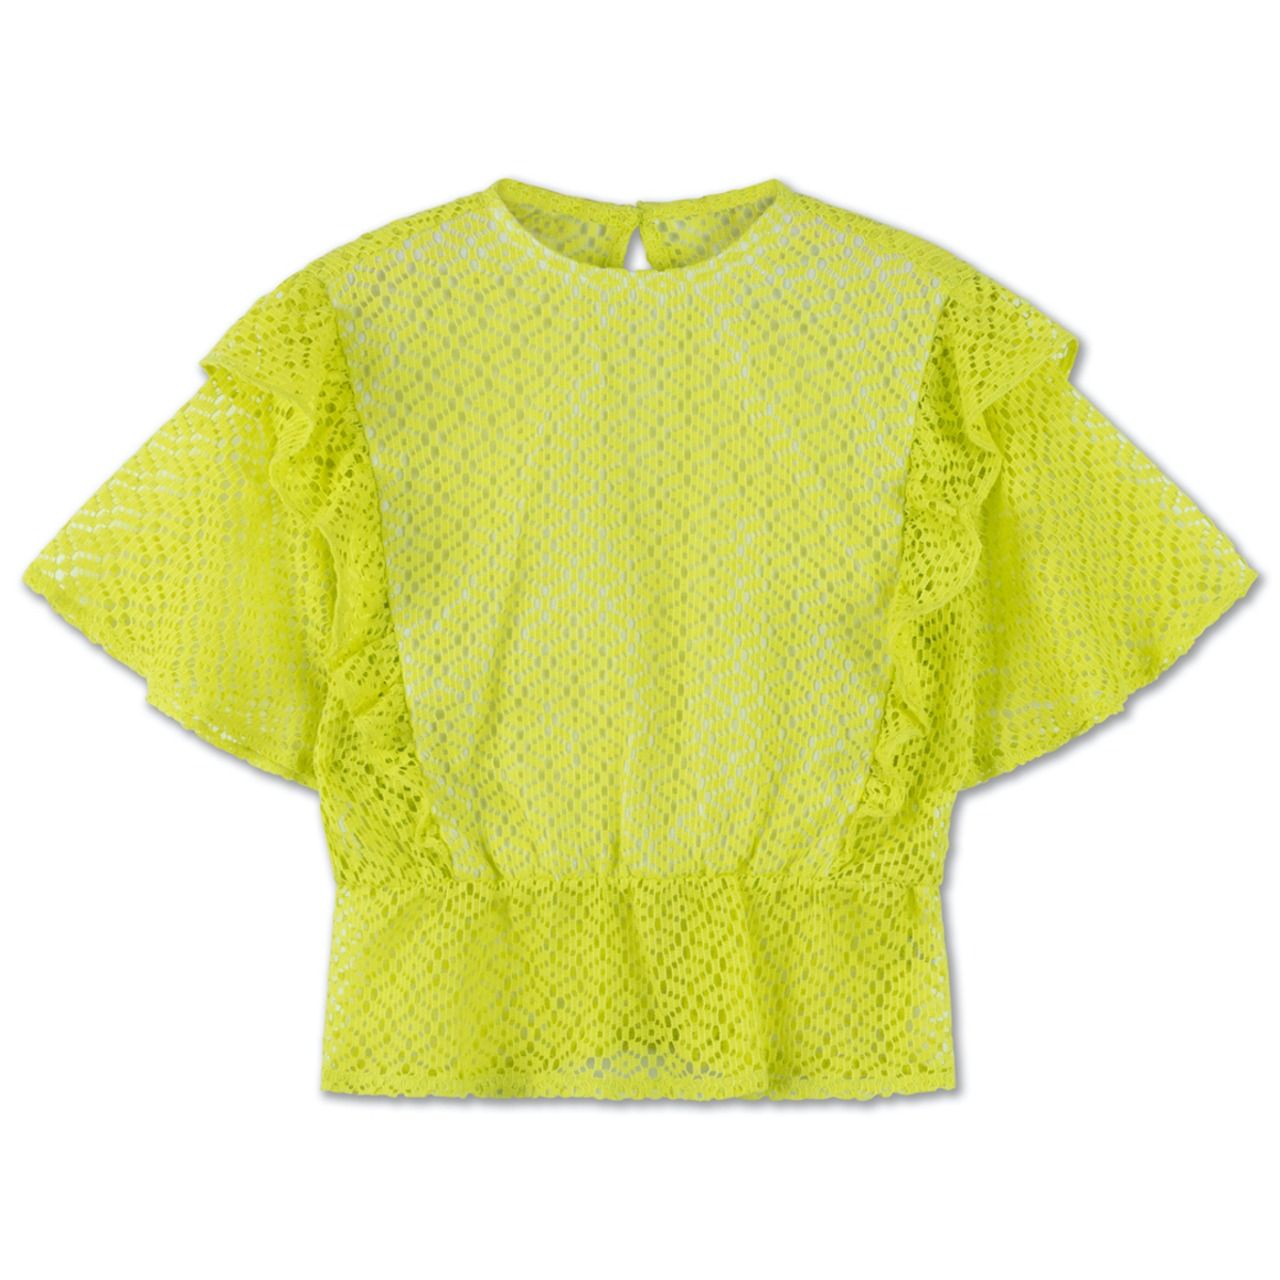 〈 REPOSE AMS 24SS 〉ruffle top / significant lace